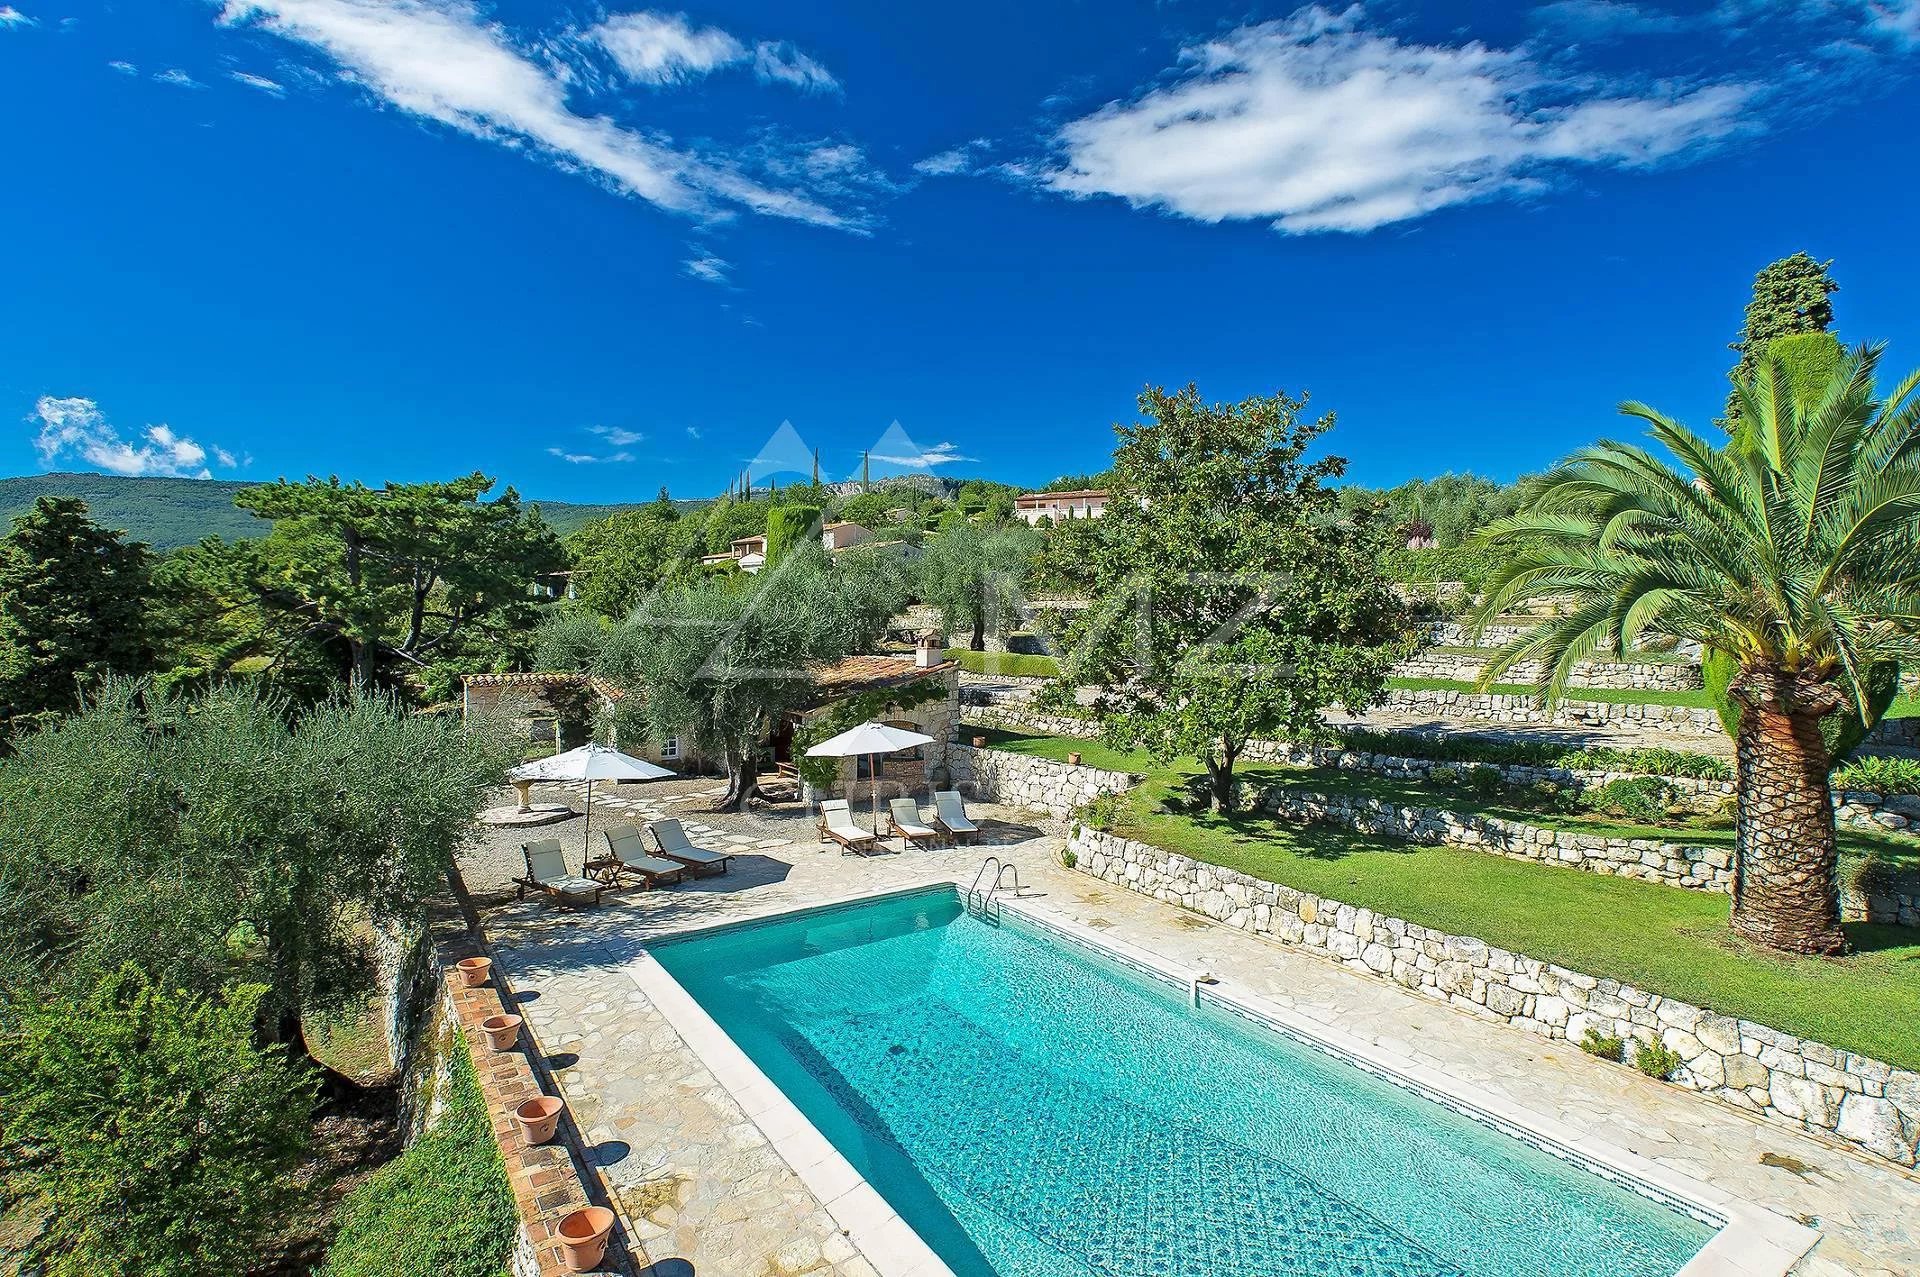 Cannes backcountry - Superb authentic property